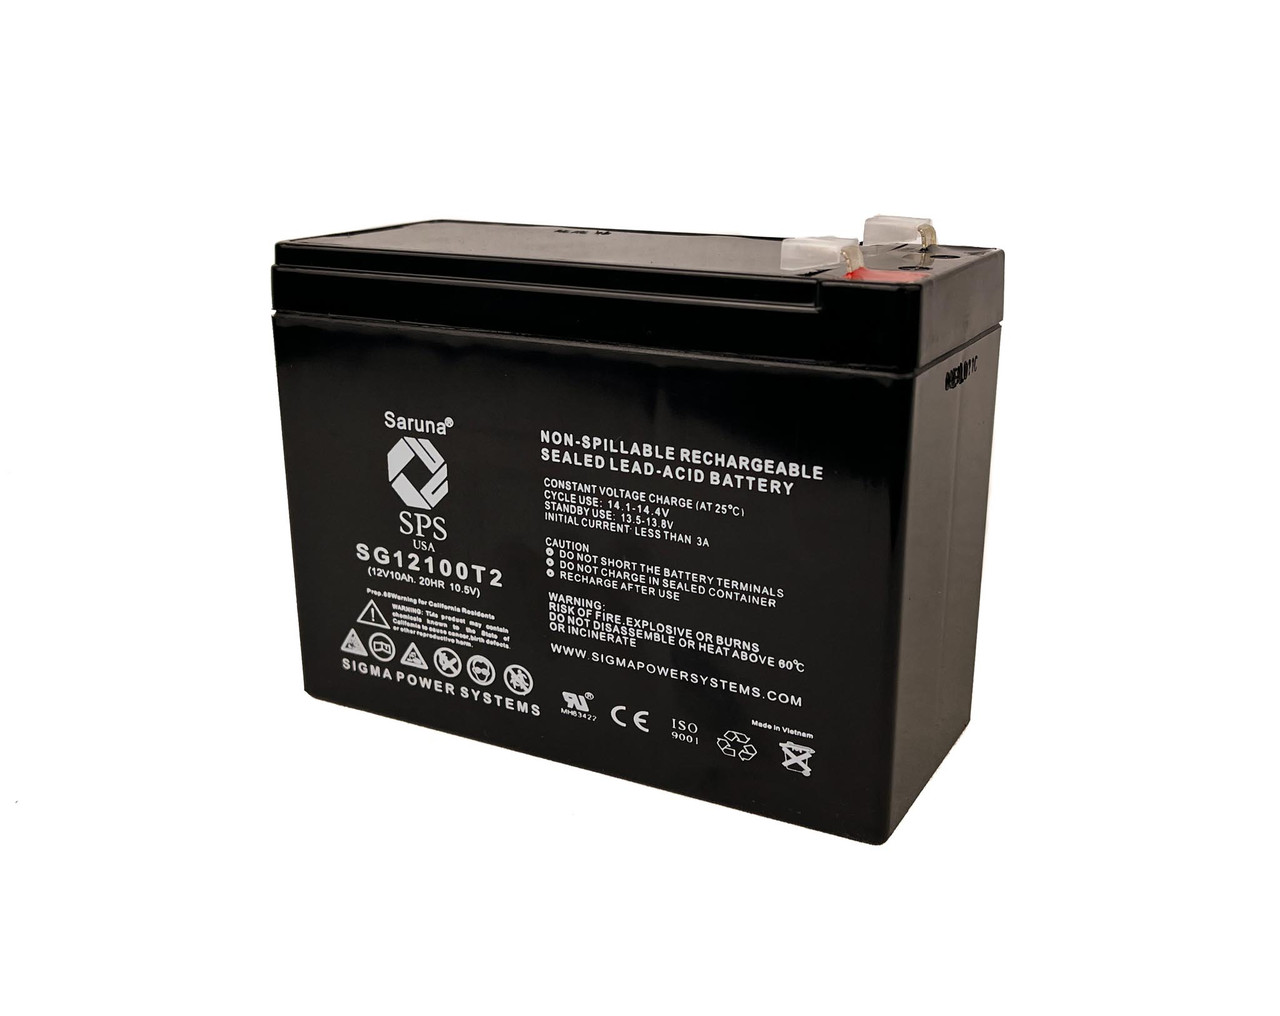 Raion Power 12V 10Ah Non-Spillable Replacement Rechargebale Battery for Ritar RT12100